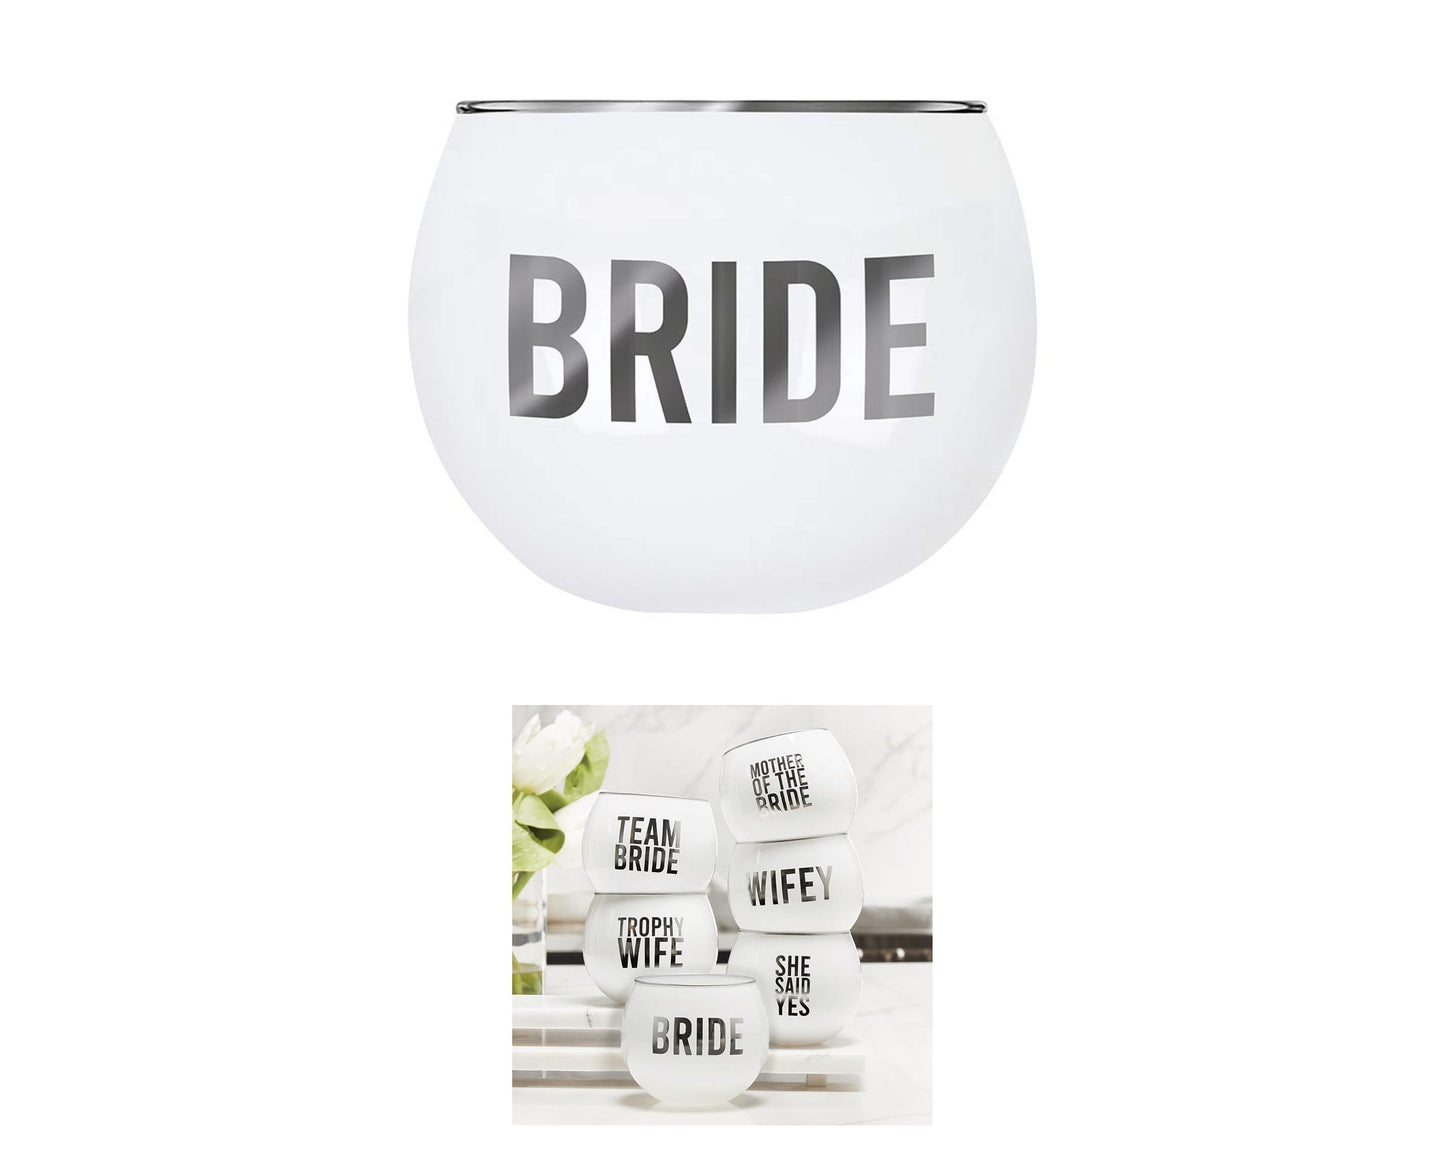 Luxe Bridal Shower Gift Set | Bride Vibes Gift Package